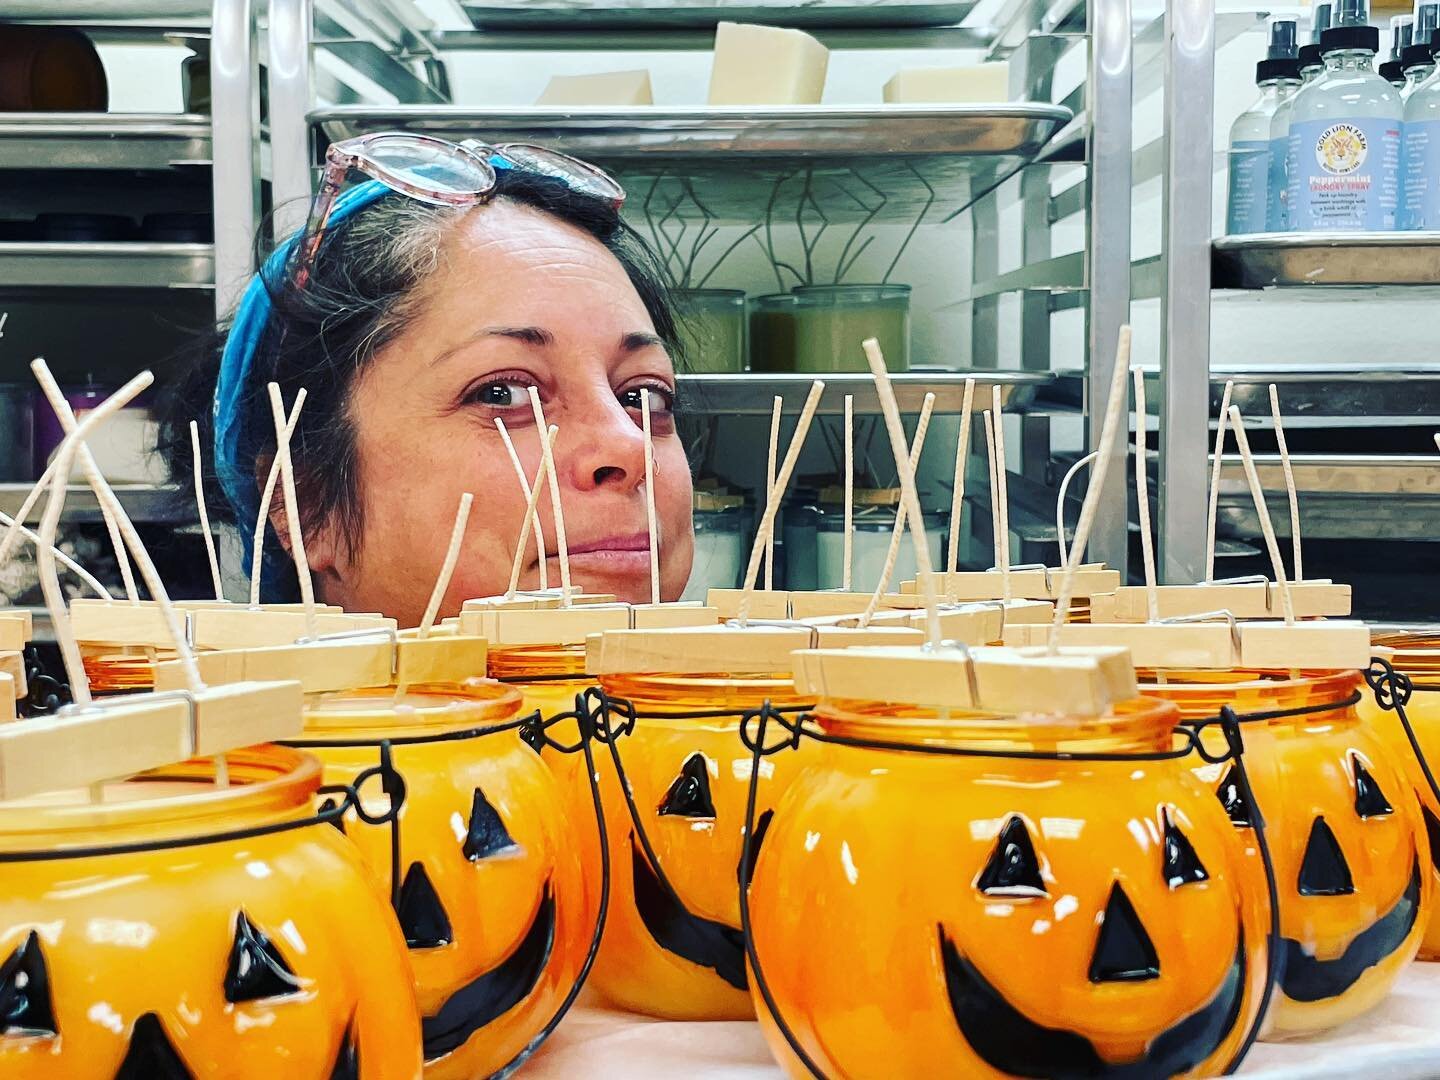 Is it Halloween yet? 🎃Heather&rsquo;s been working overtime on our candle range! Love the pumpkin sandalwood candles! The shop smells just like fall! 🍁🍂🍁

#PumpkinCandle #Handcrafted #FallCandle #CandleMaker #candlemakers #goldlionfarm